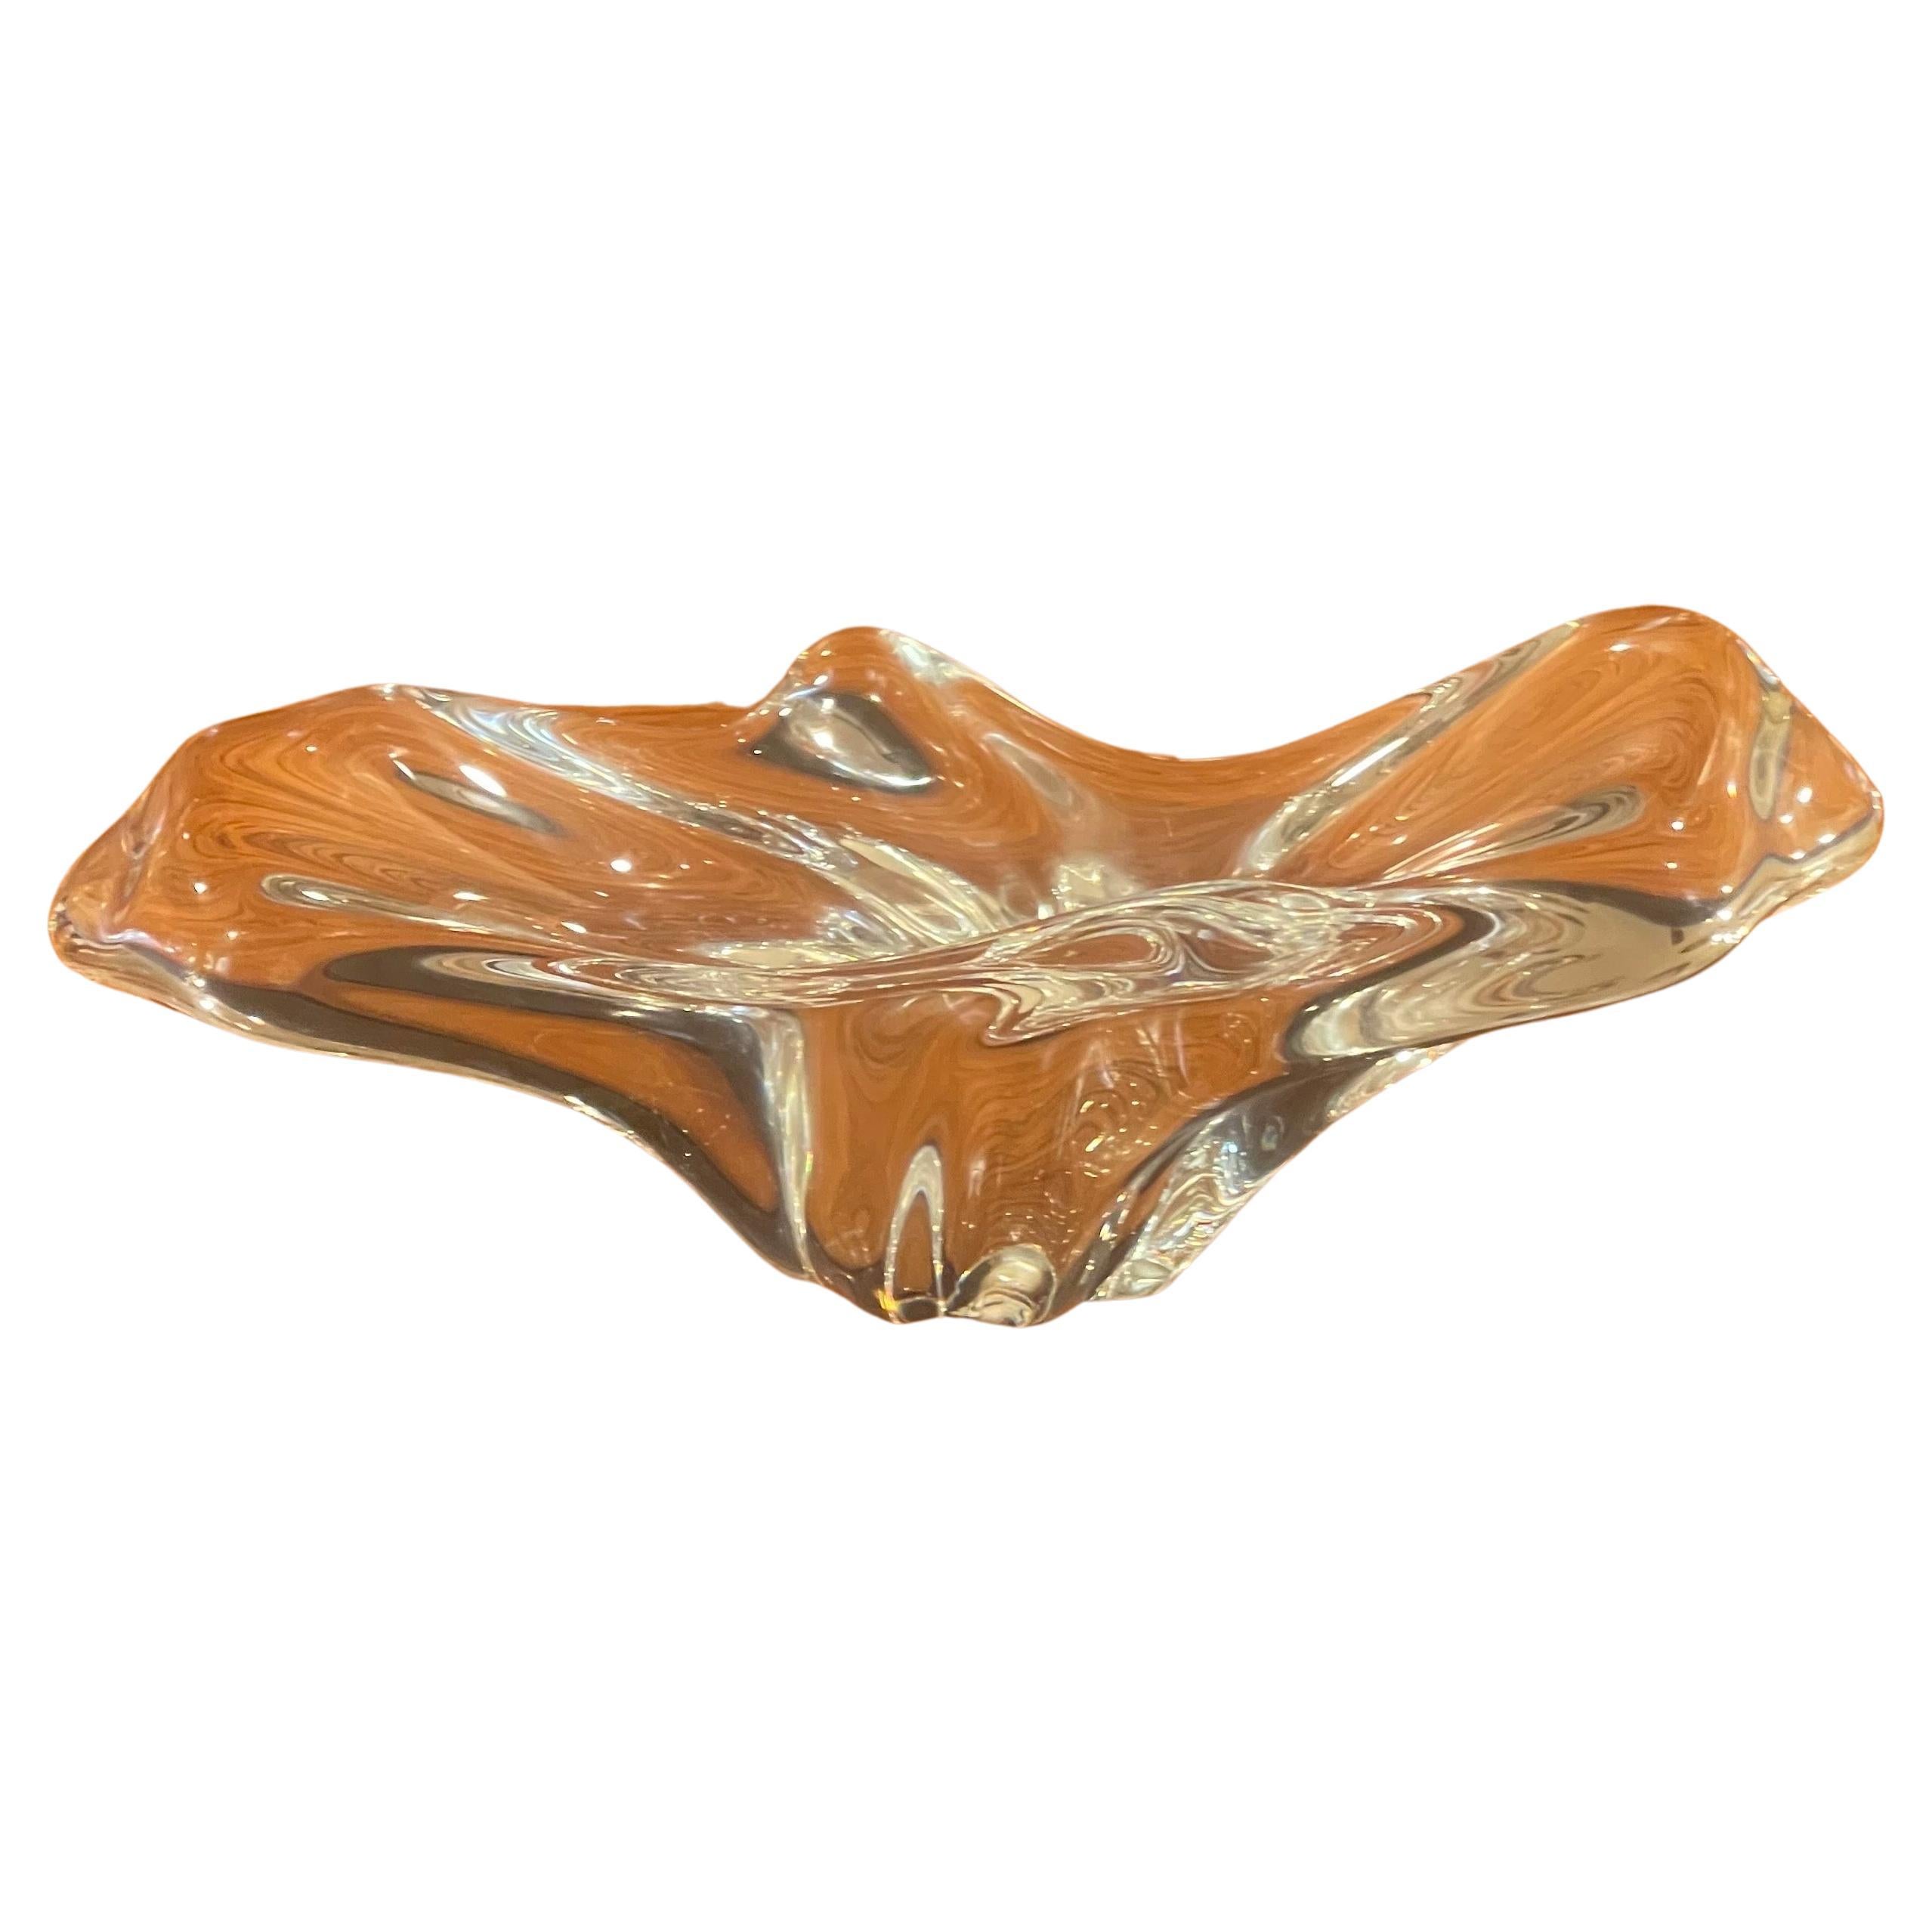 A very nice small crystal free form sculptural bowl / candy dish by Baccarat, circa 1990s. The piece is in excellent condition with no visible imperfections and has great clarity. Signed on the underside, the piece measures 8